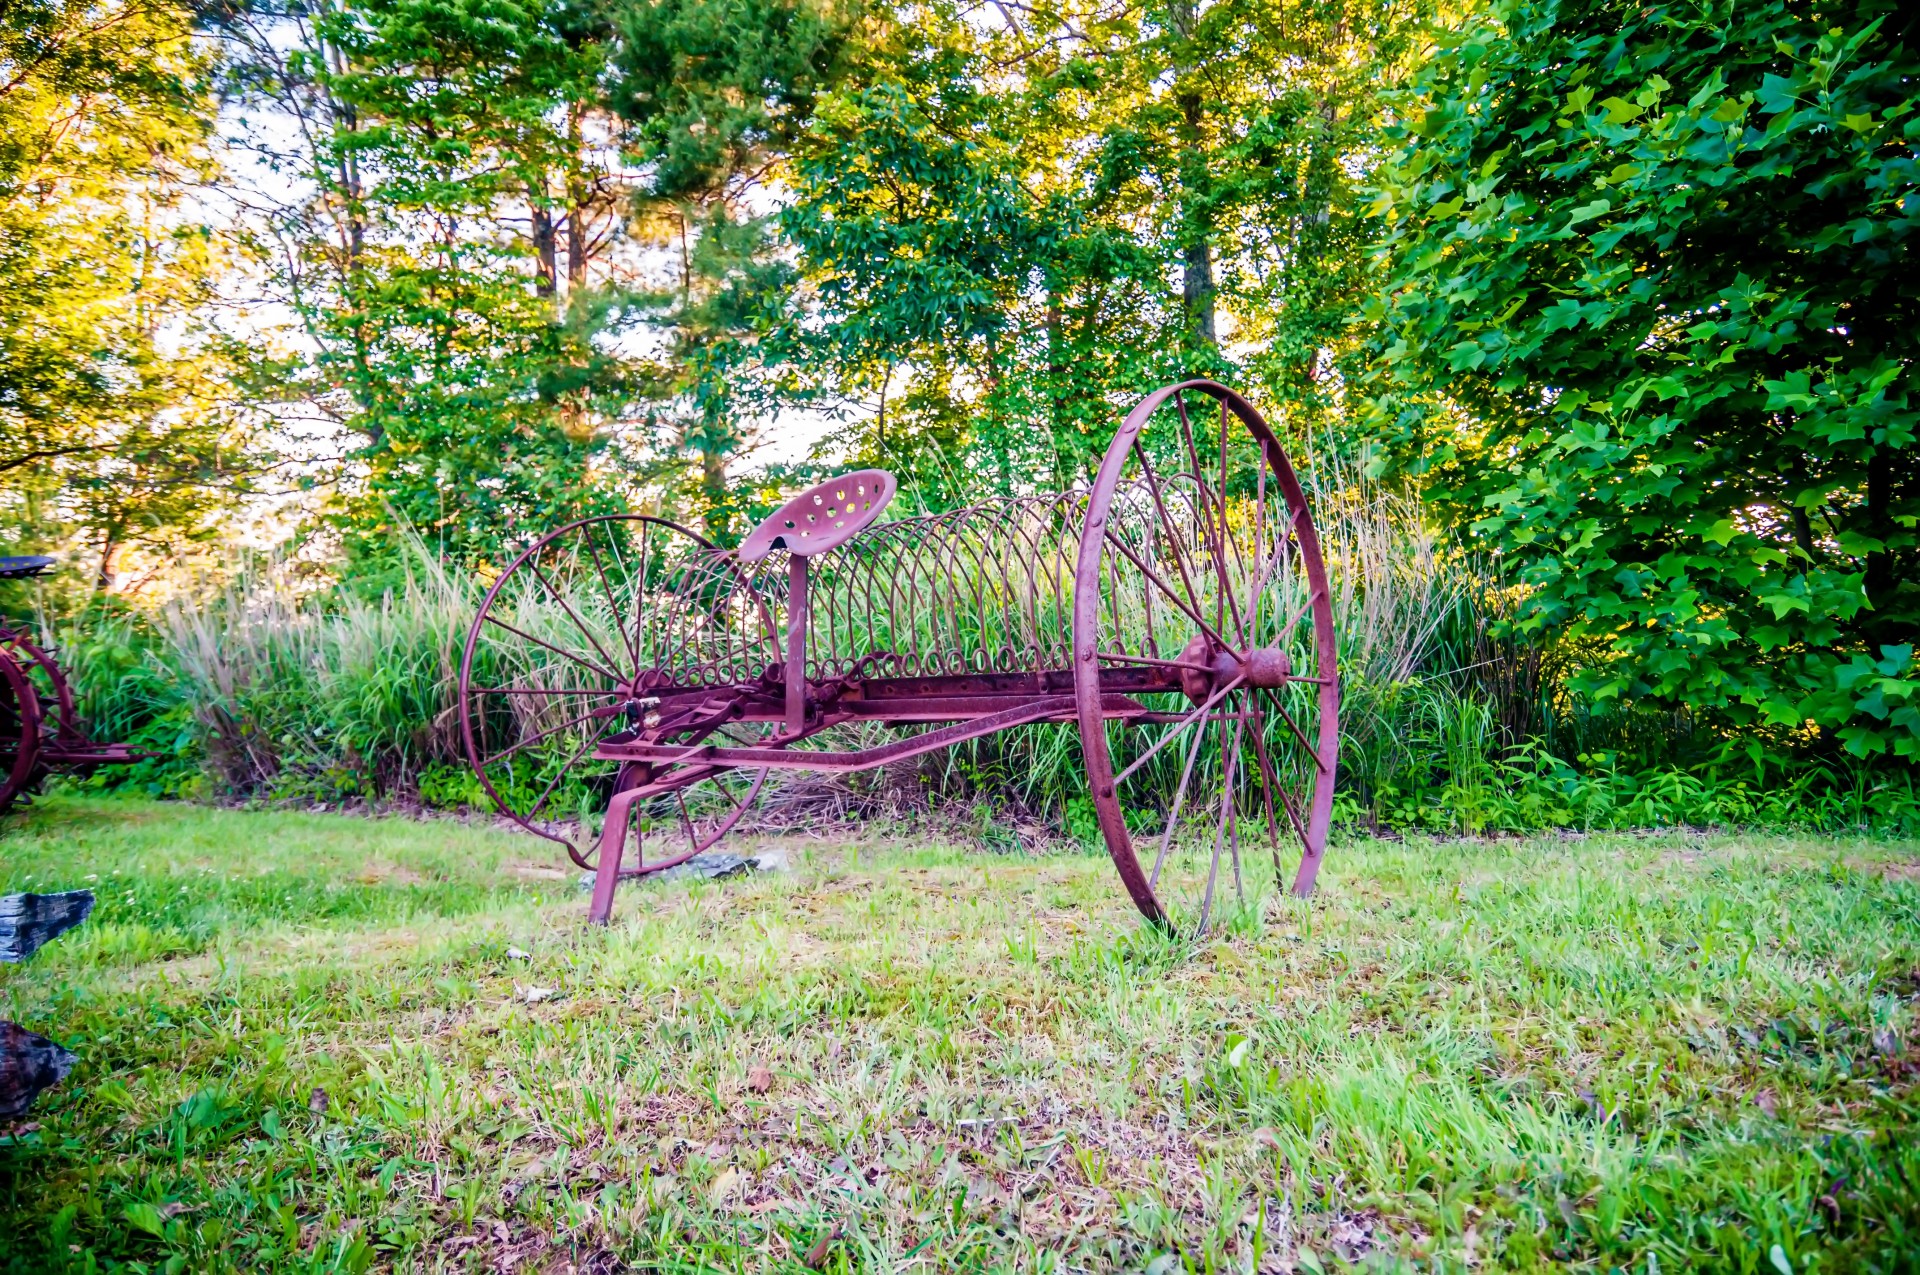 Abandoned Agriculture Equipment